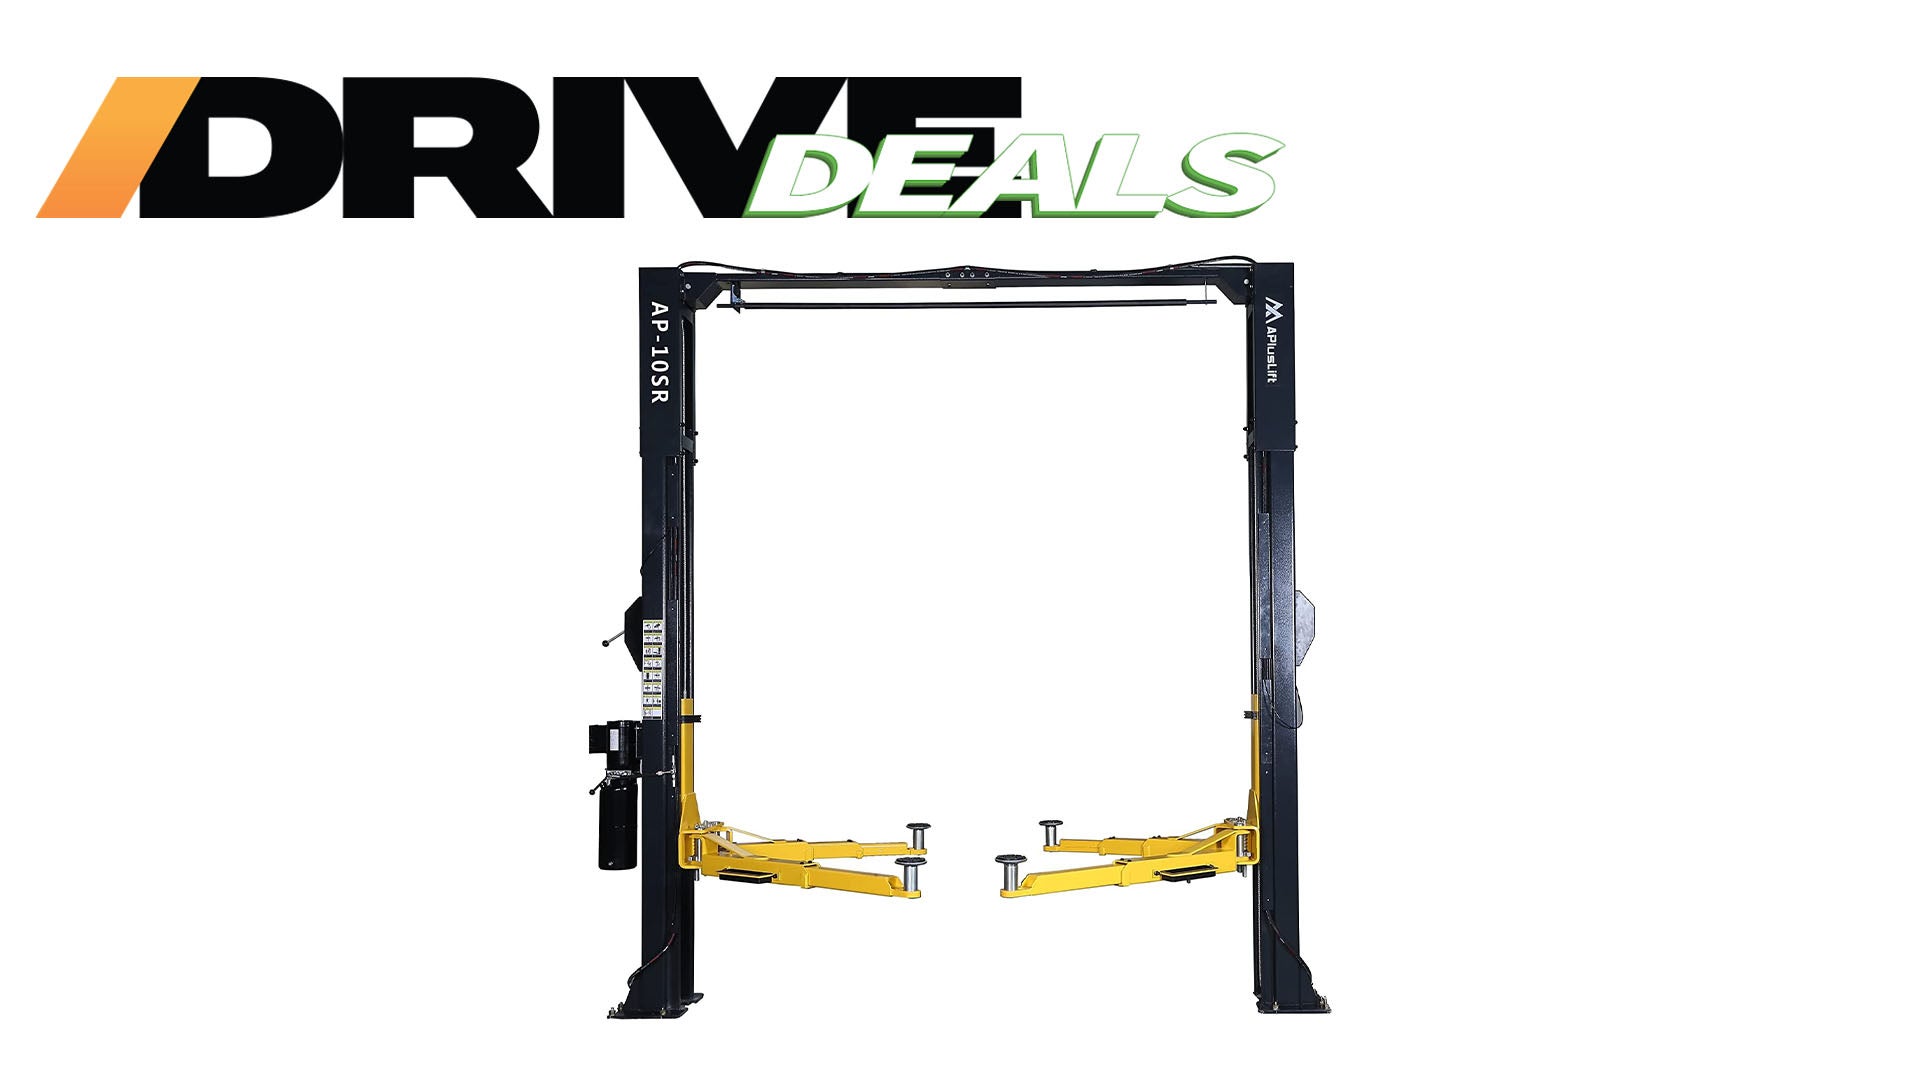 Revolutionize Your Shop With Black Friday Two and Four-Post Lift Deals